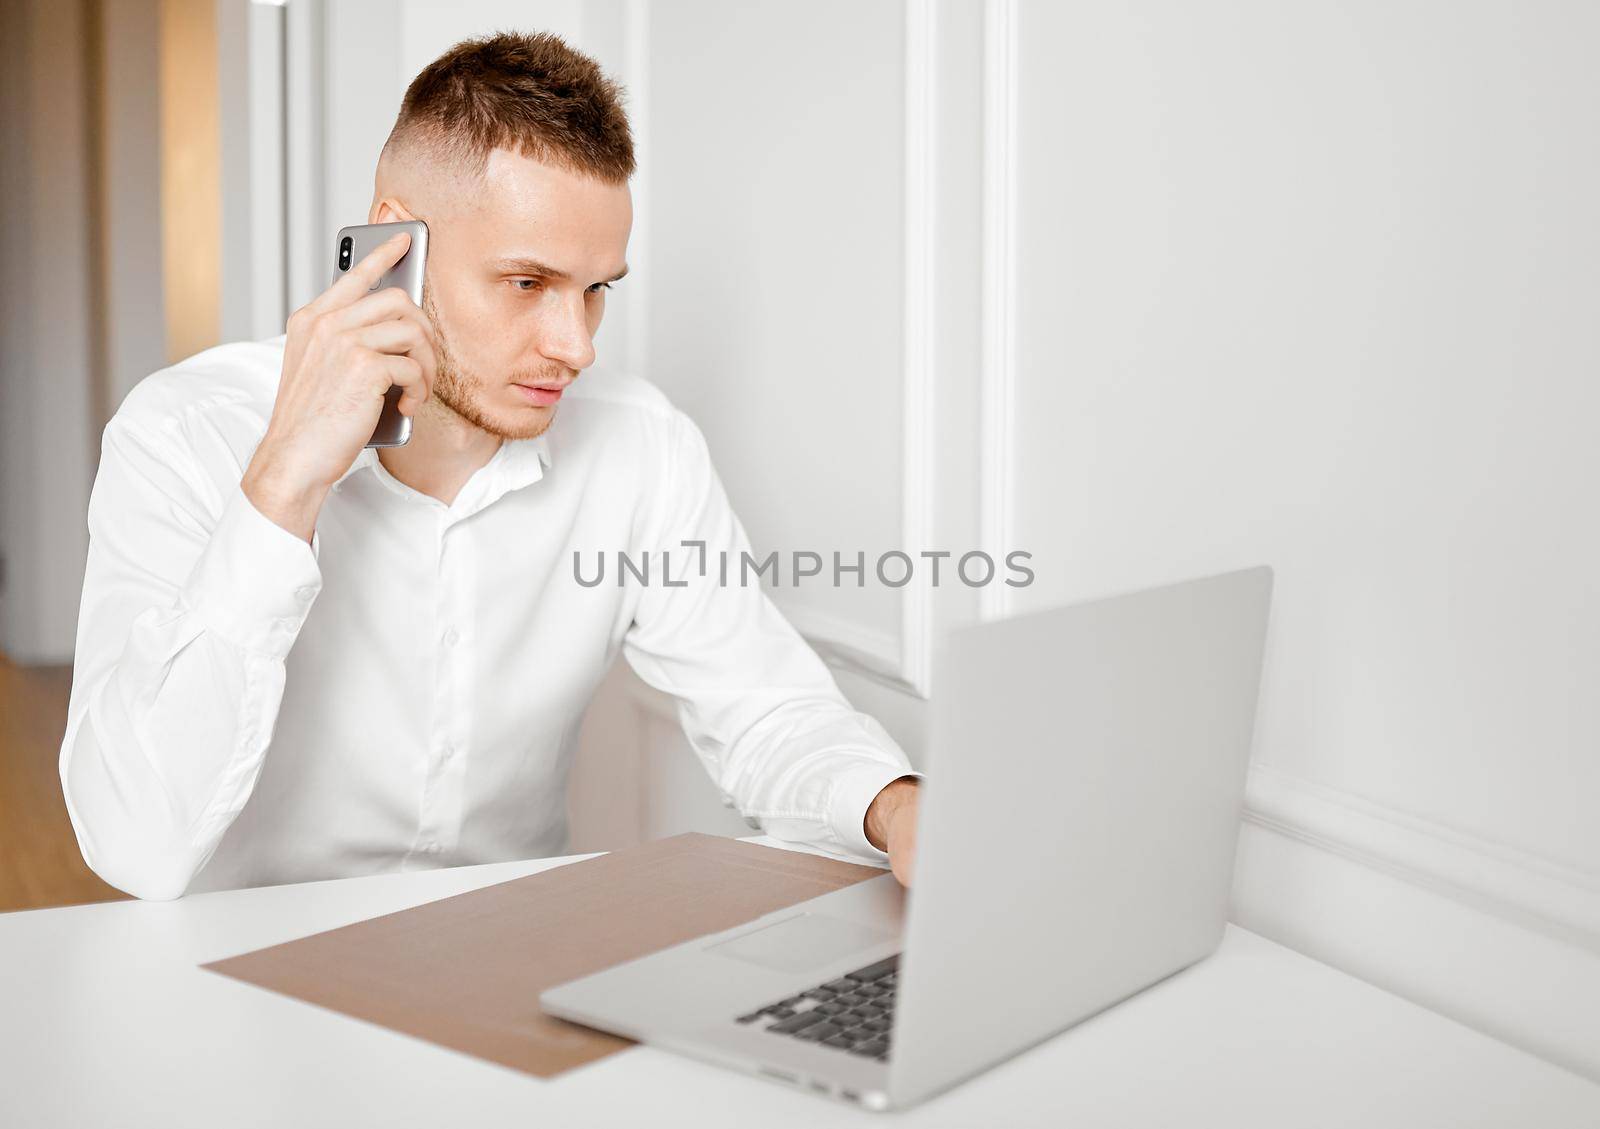 A young man works at home in the kitchen behind a laptop talking on the phone. High quality photo